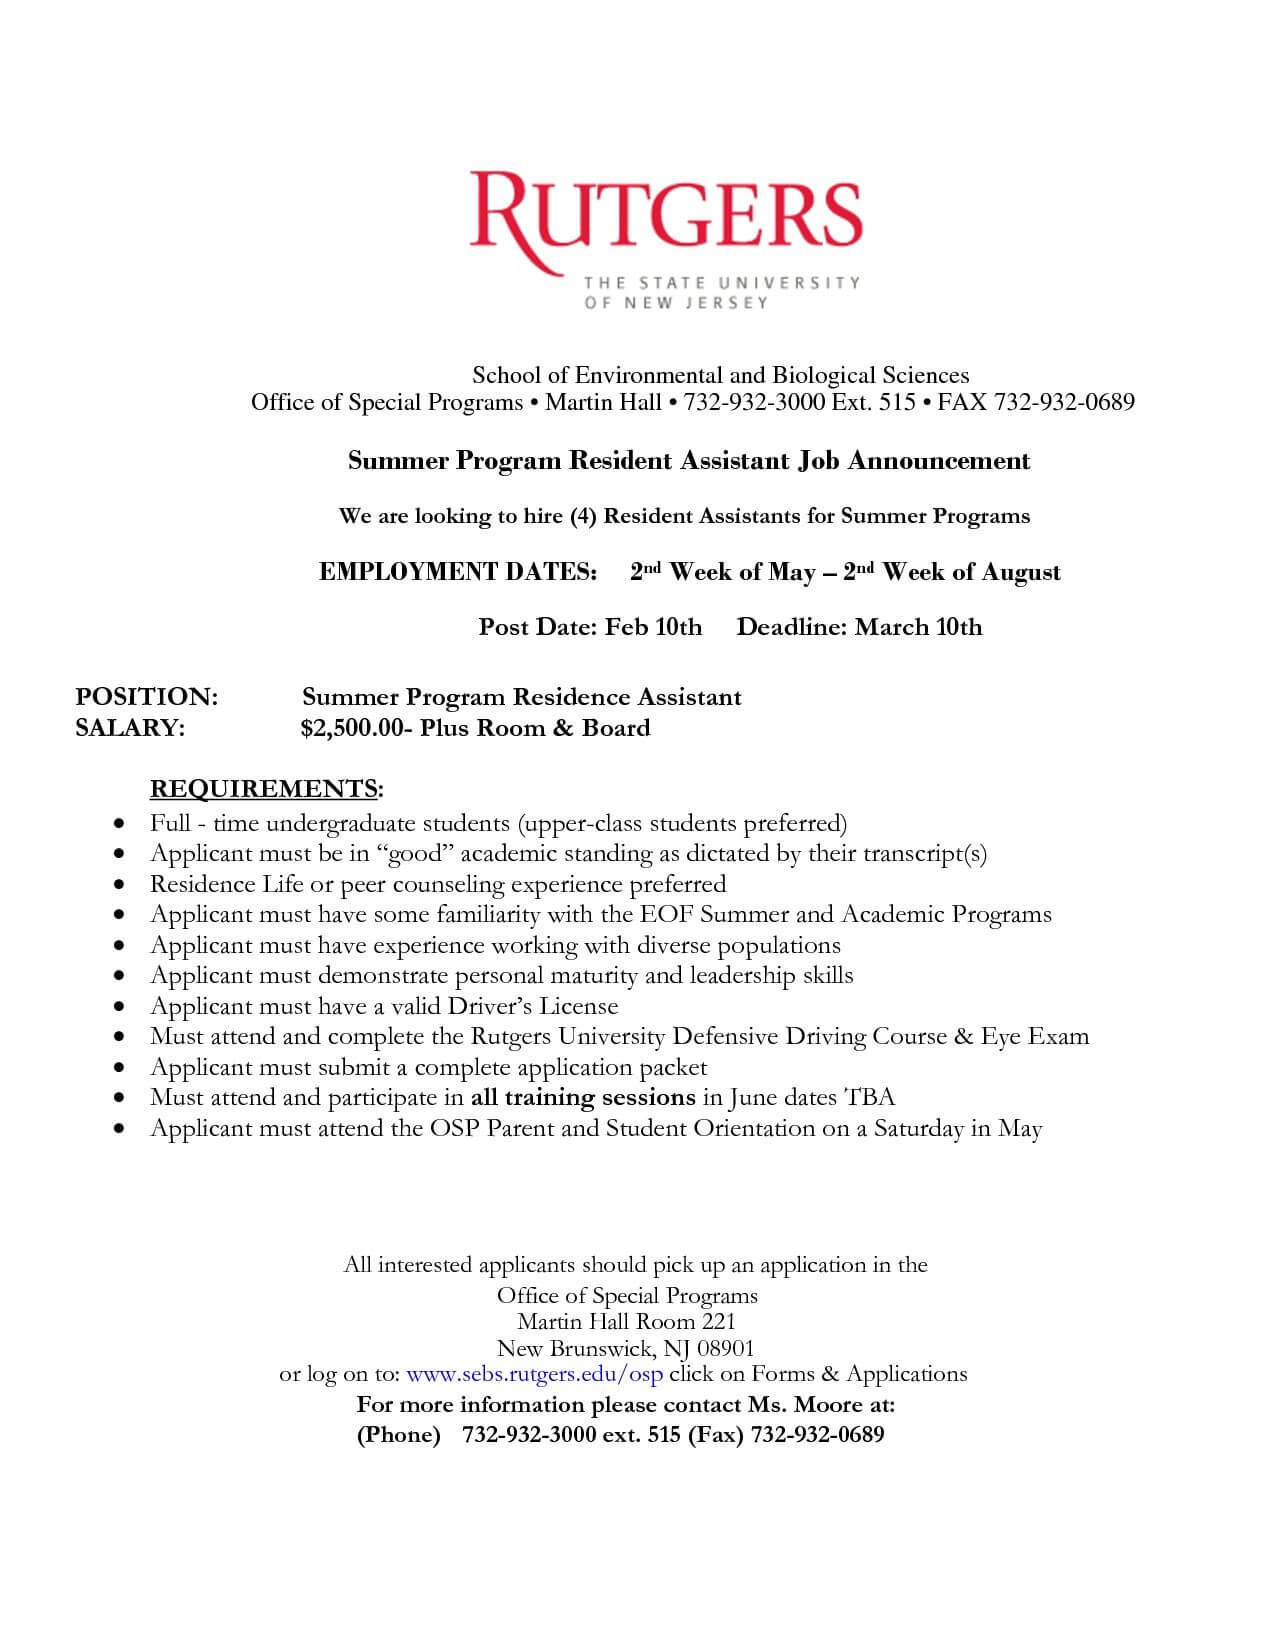 Resume Template Rutgers - Resume Examples | Resume Template With Regard To Rutgers Powerpoint Template